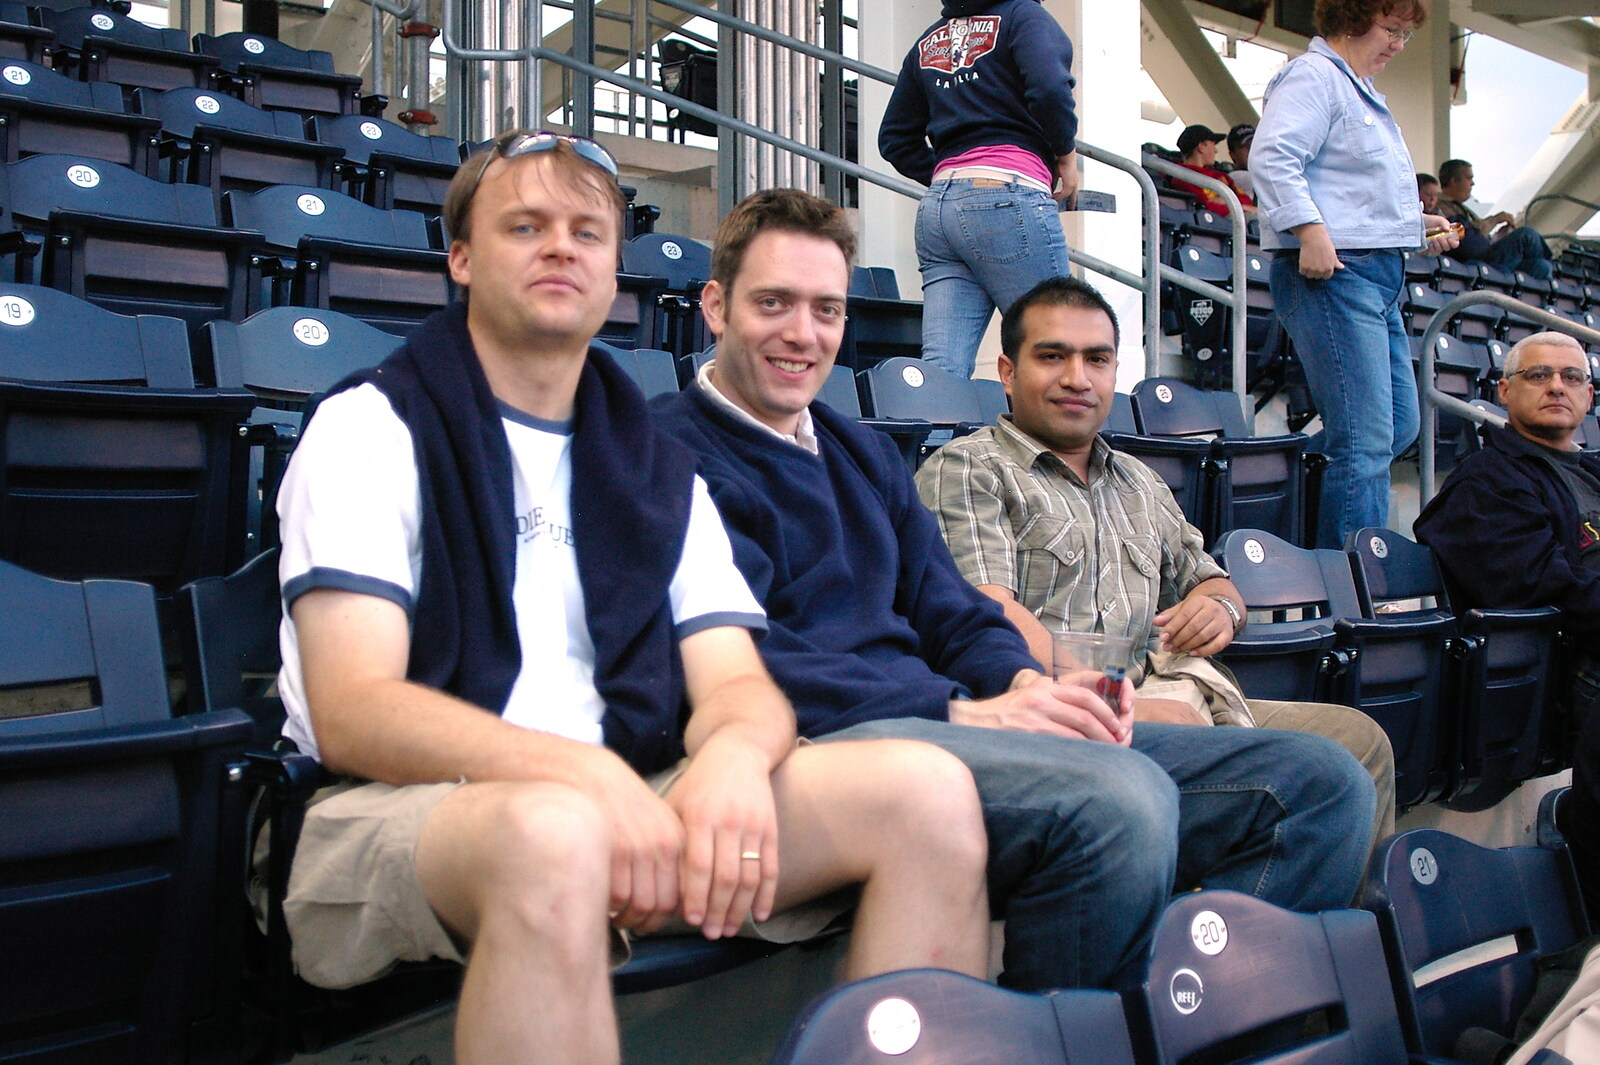 Nick, Stefan and Anwar up in the bleachers from The Padres at Petco Park: a Baseball Game, San Diego, California - 31st May 2005